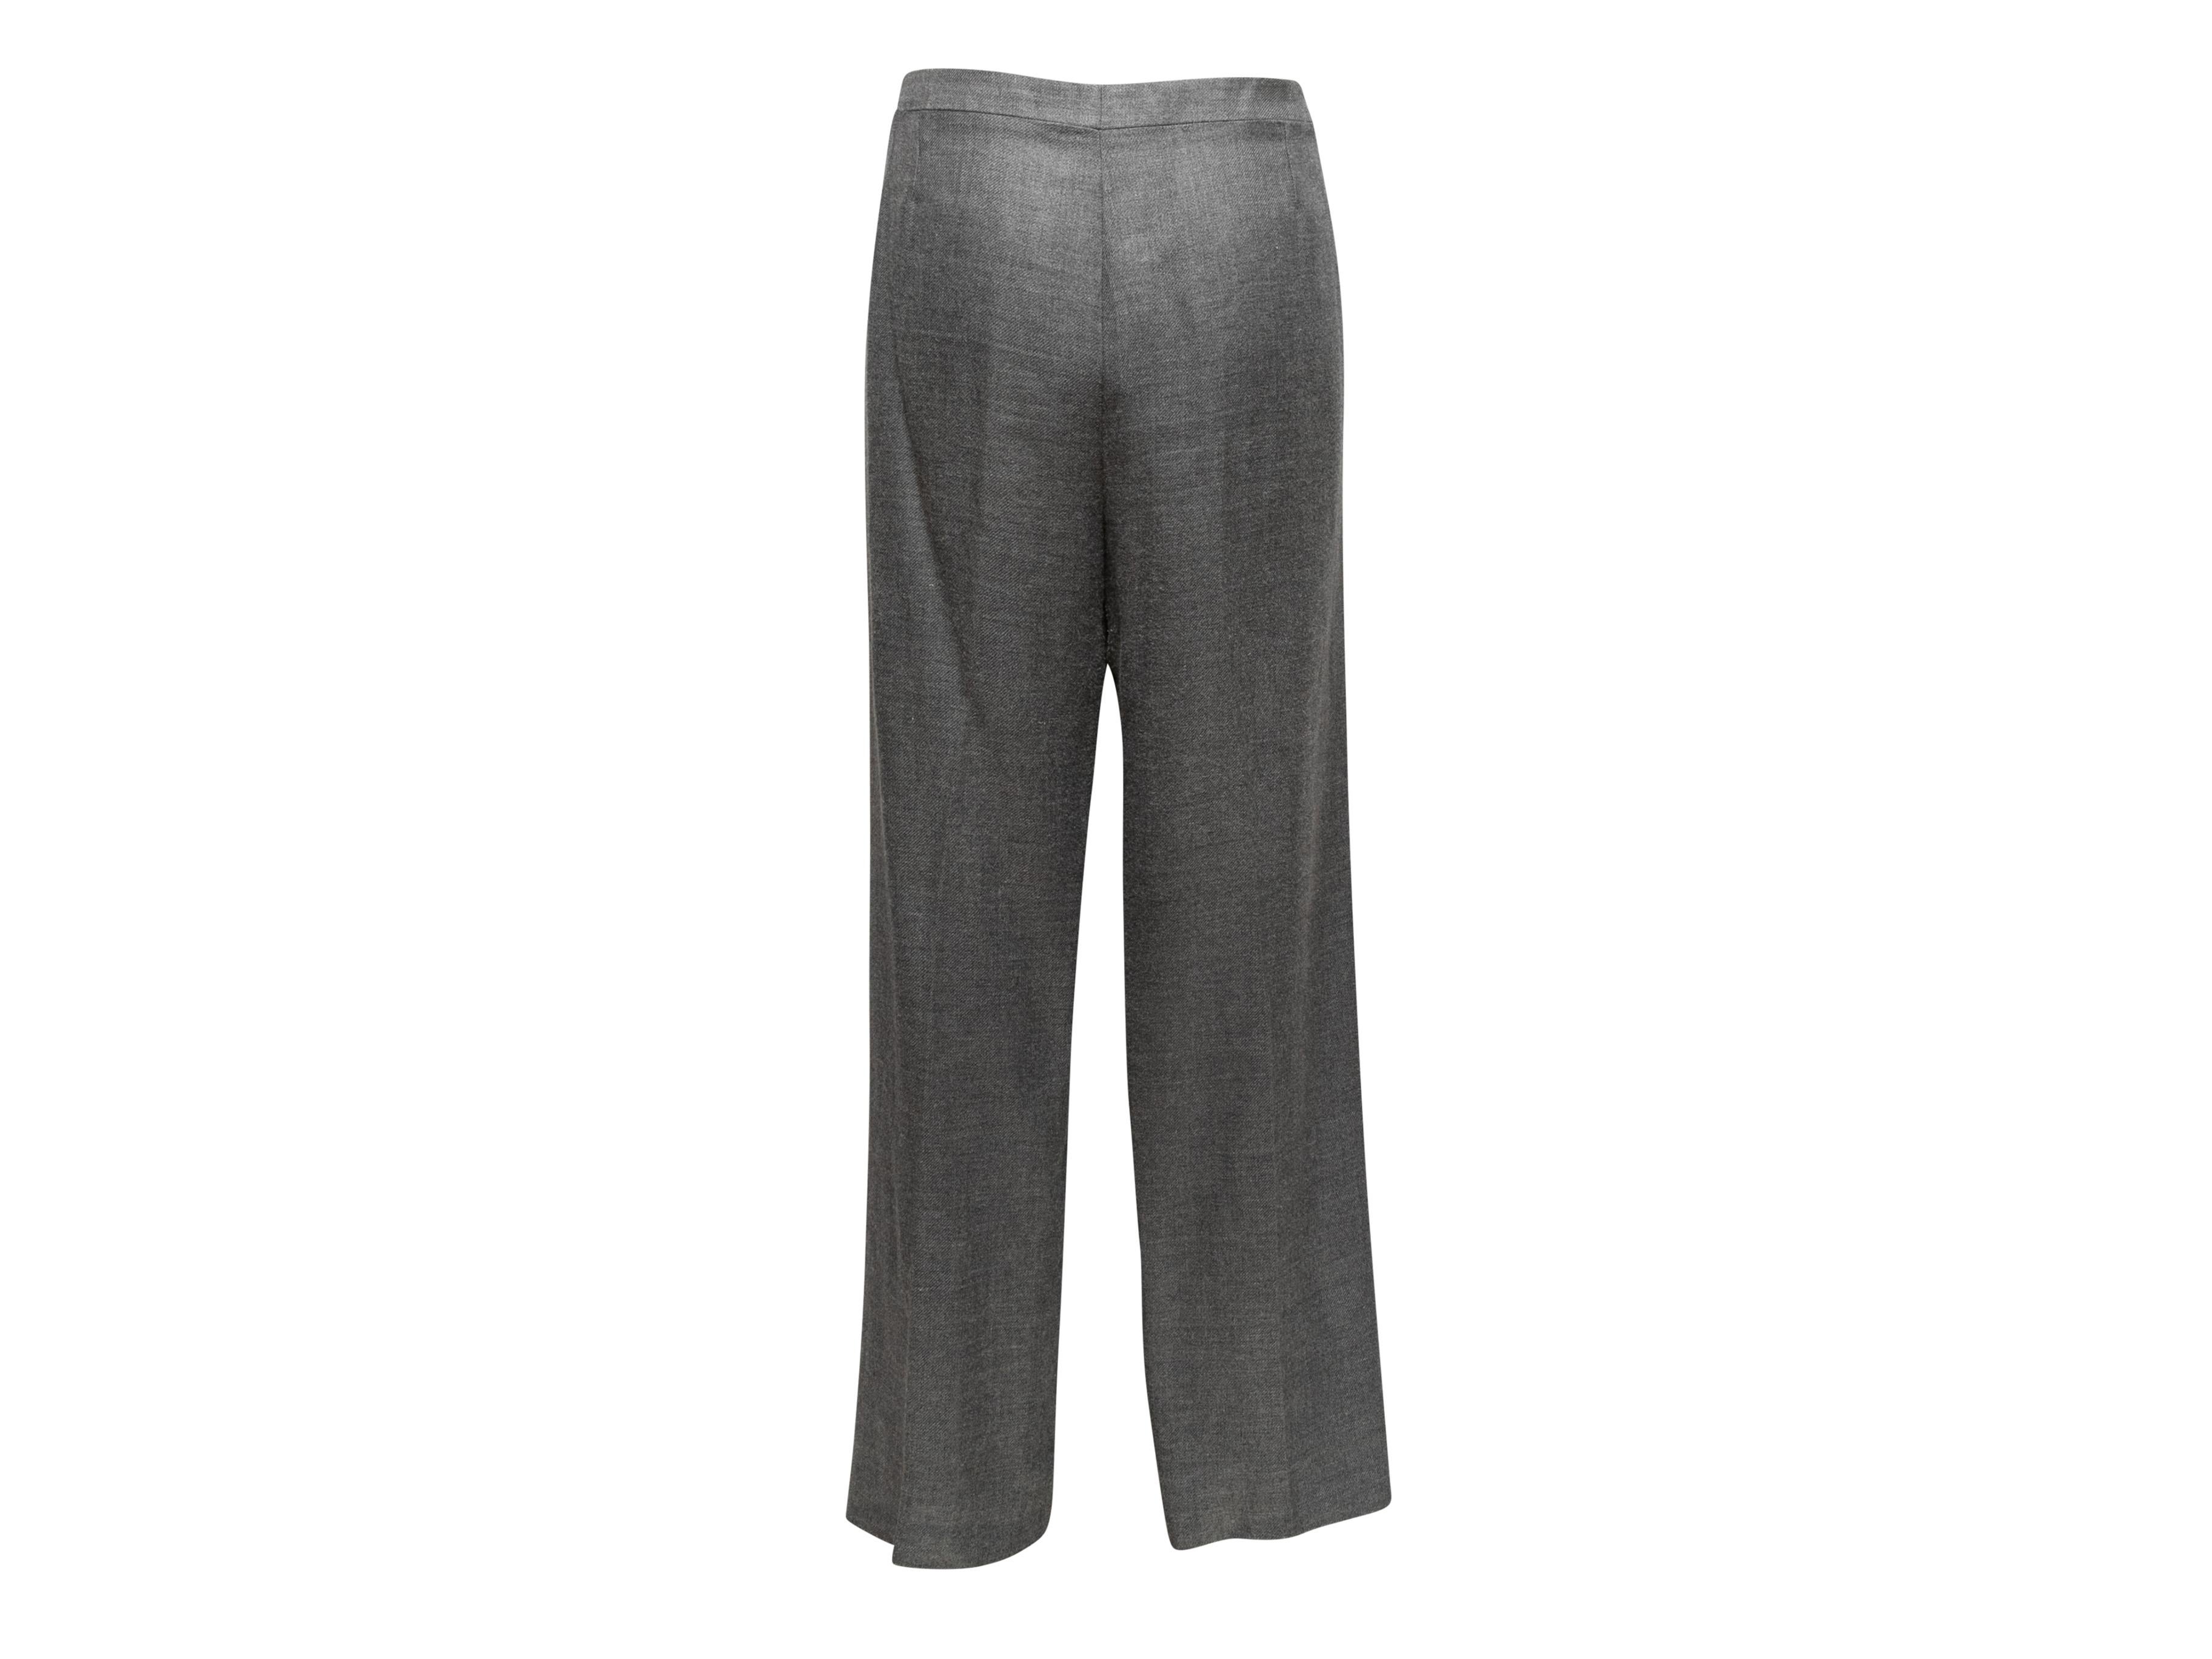 Vintage Grey Chanel Cruise 2005 Linen & Cashmere-Blend Trousers Size FR 48 In Good Condition For Sale In New York, NY